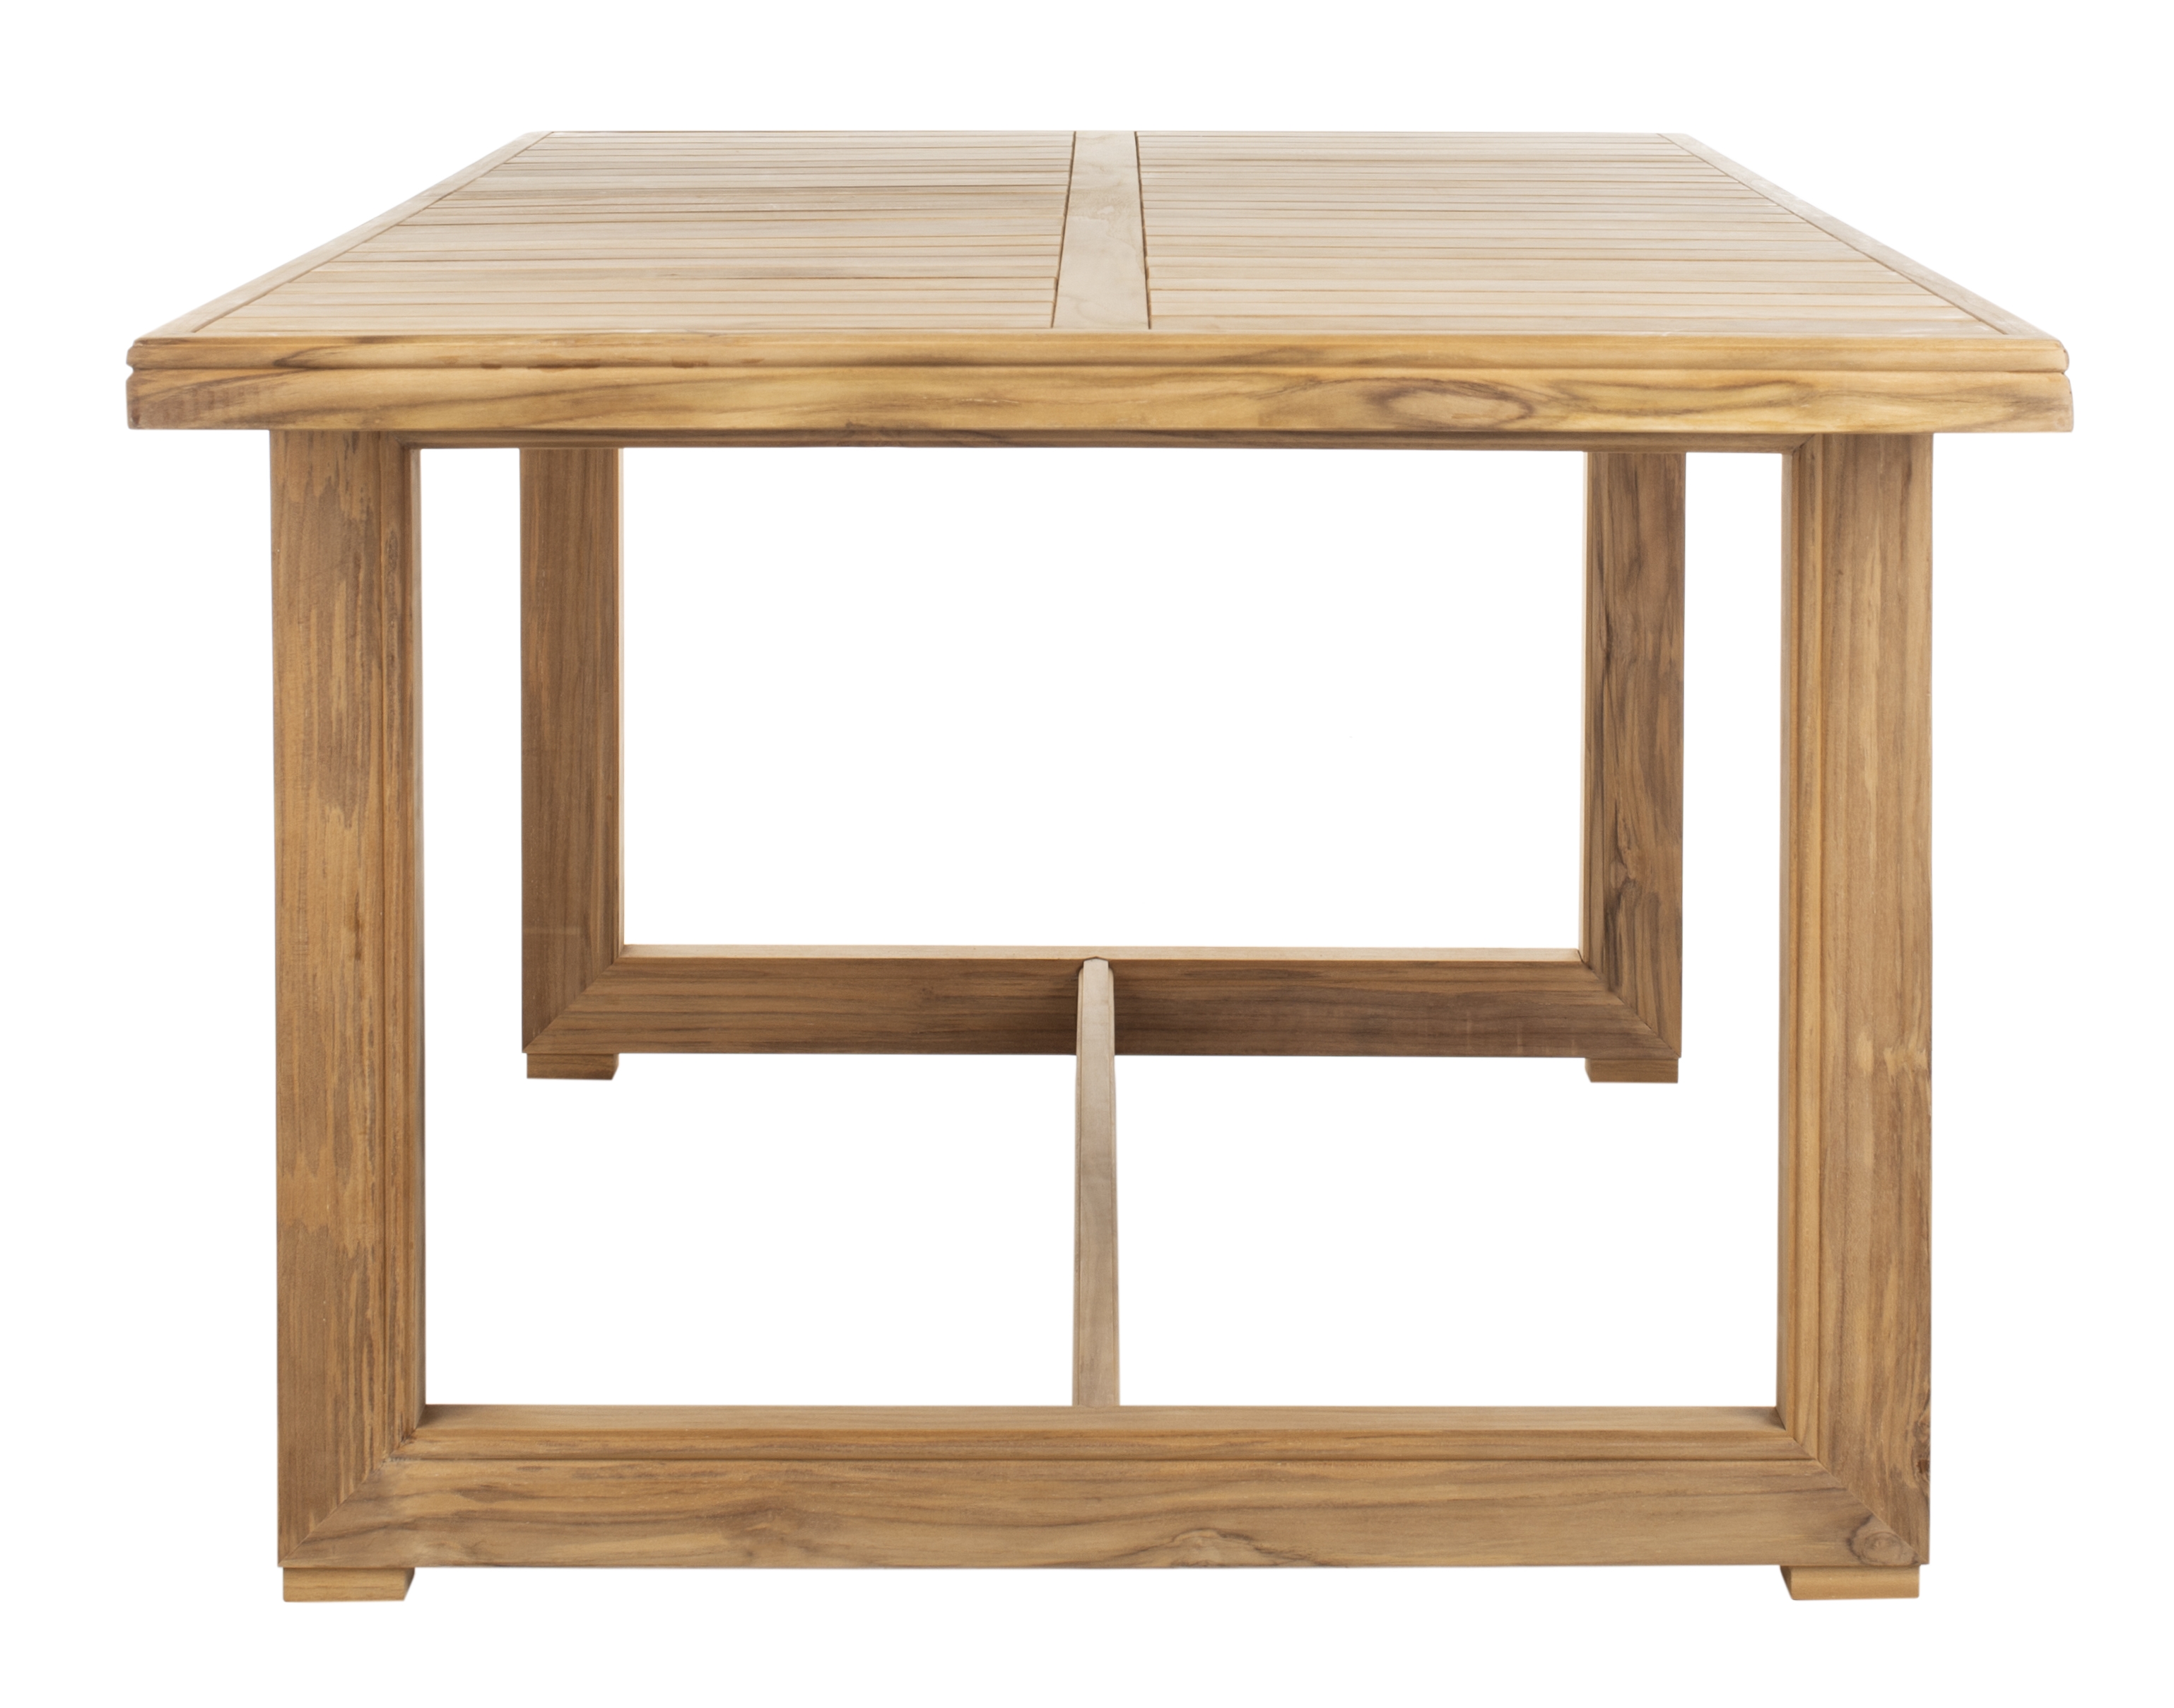 Montford Dining Table - Natural - Arlo Home - Image 2